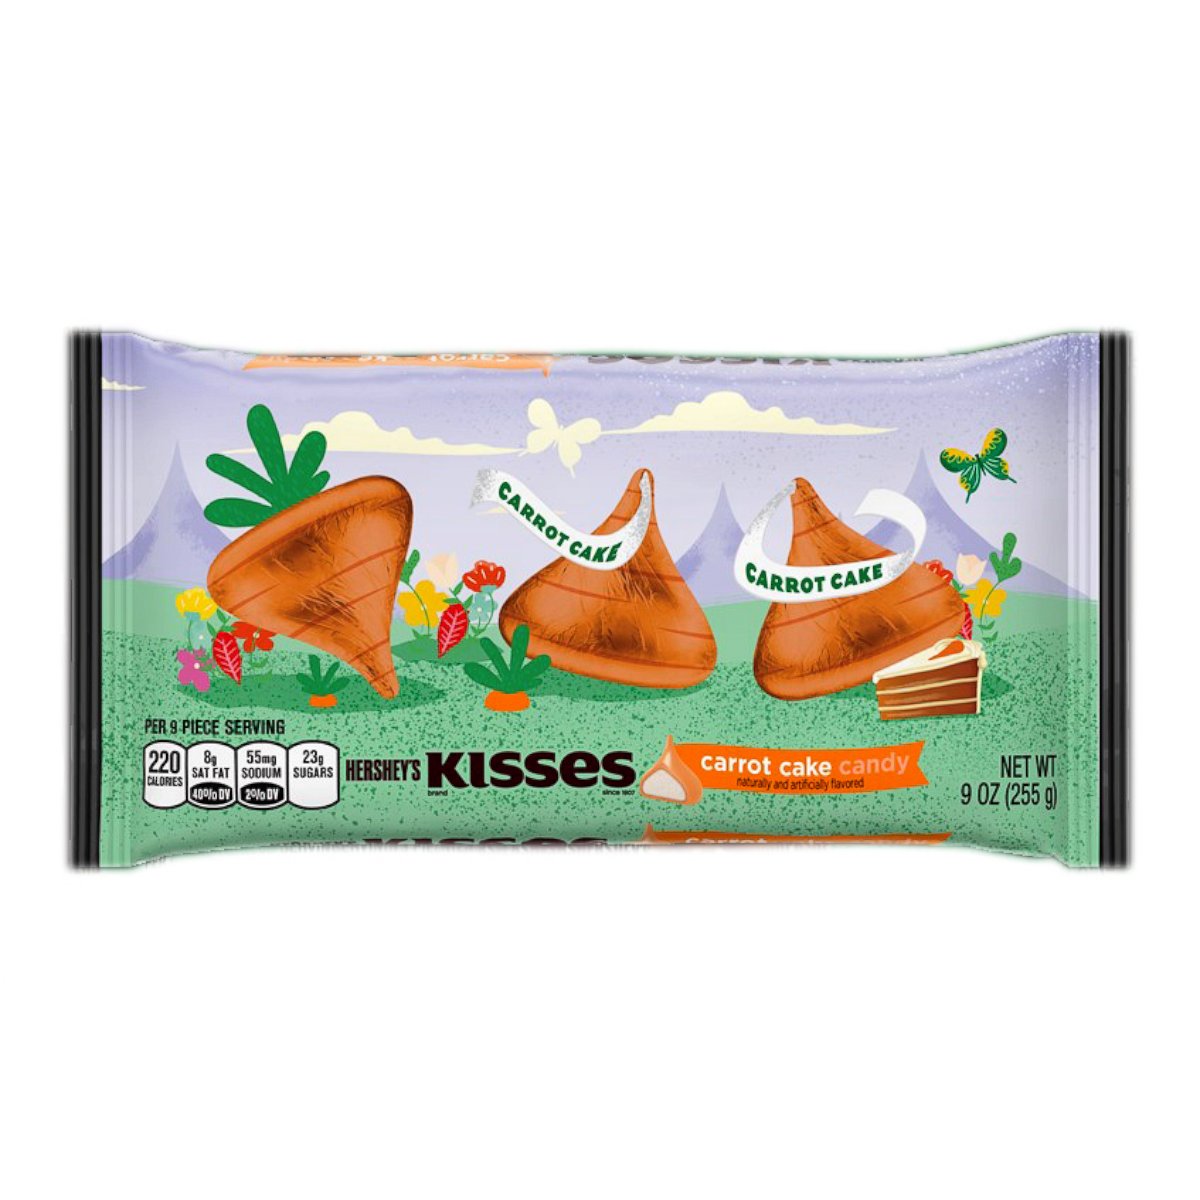 PHOTO: Hershey's has released new carrot cake-flavored Kisses for its Easter candy lineup.